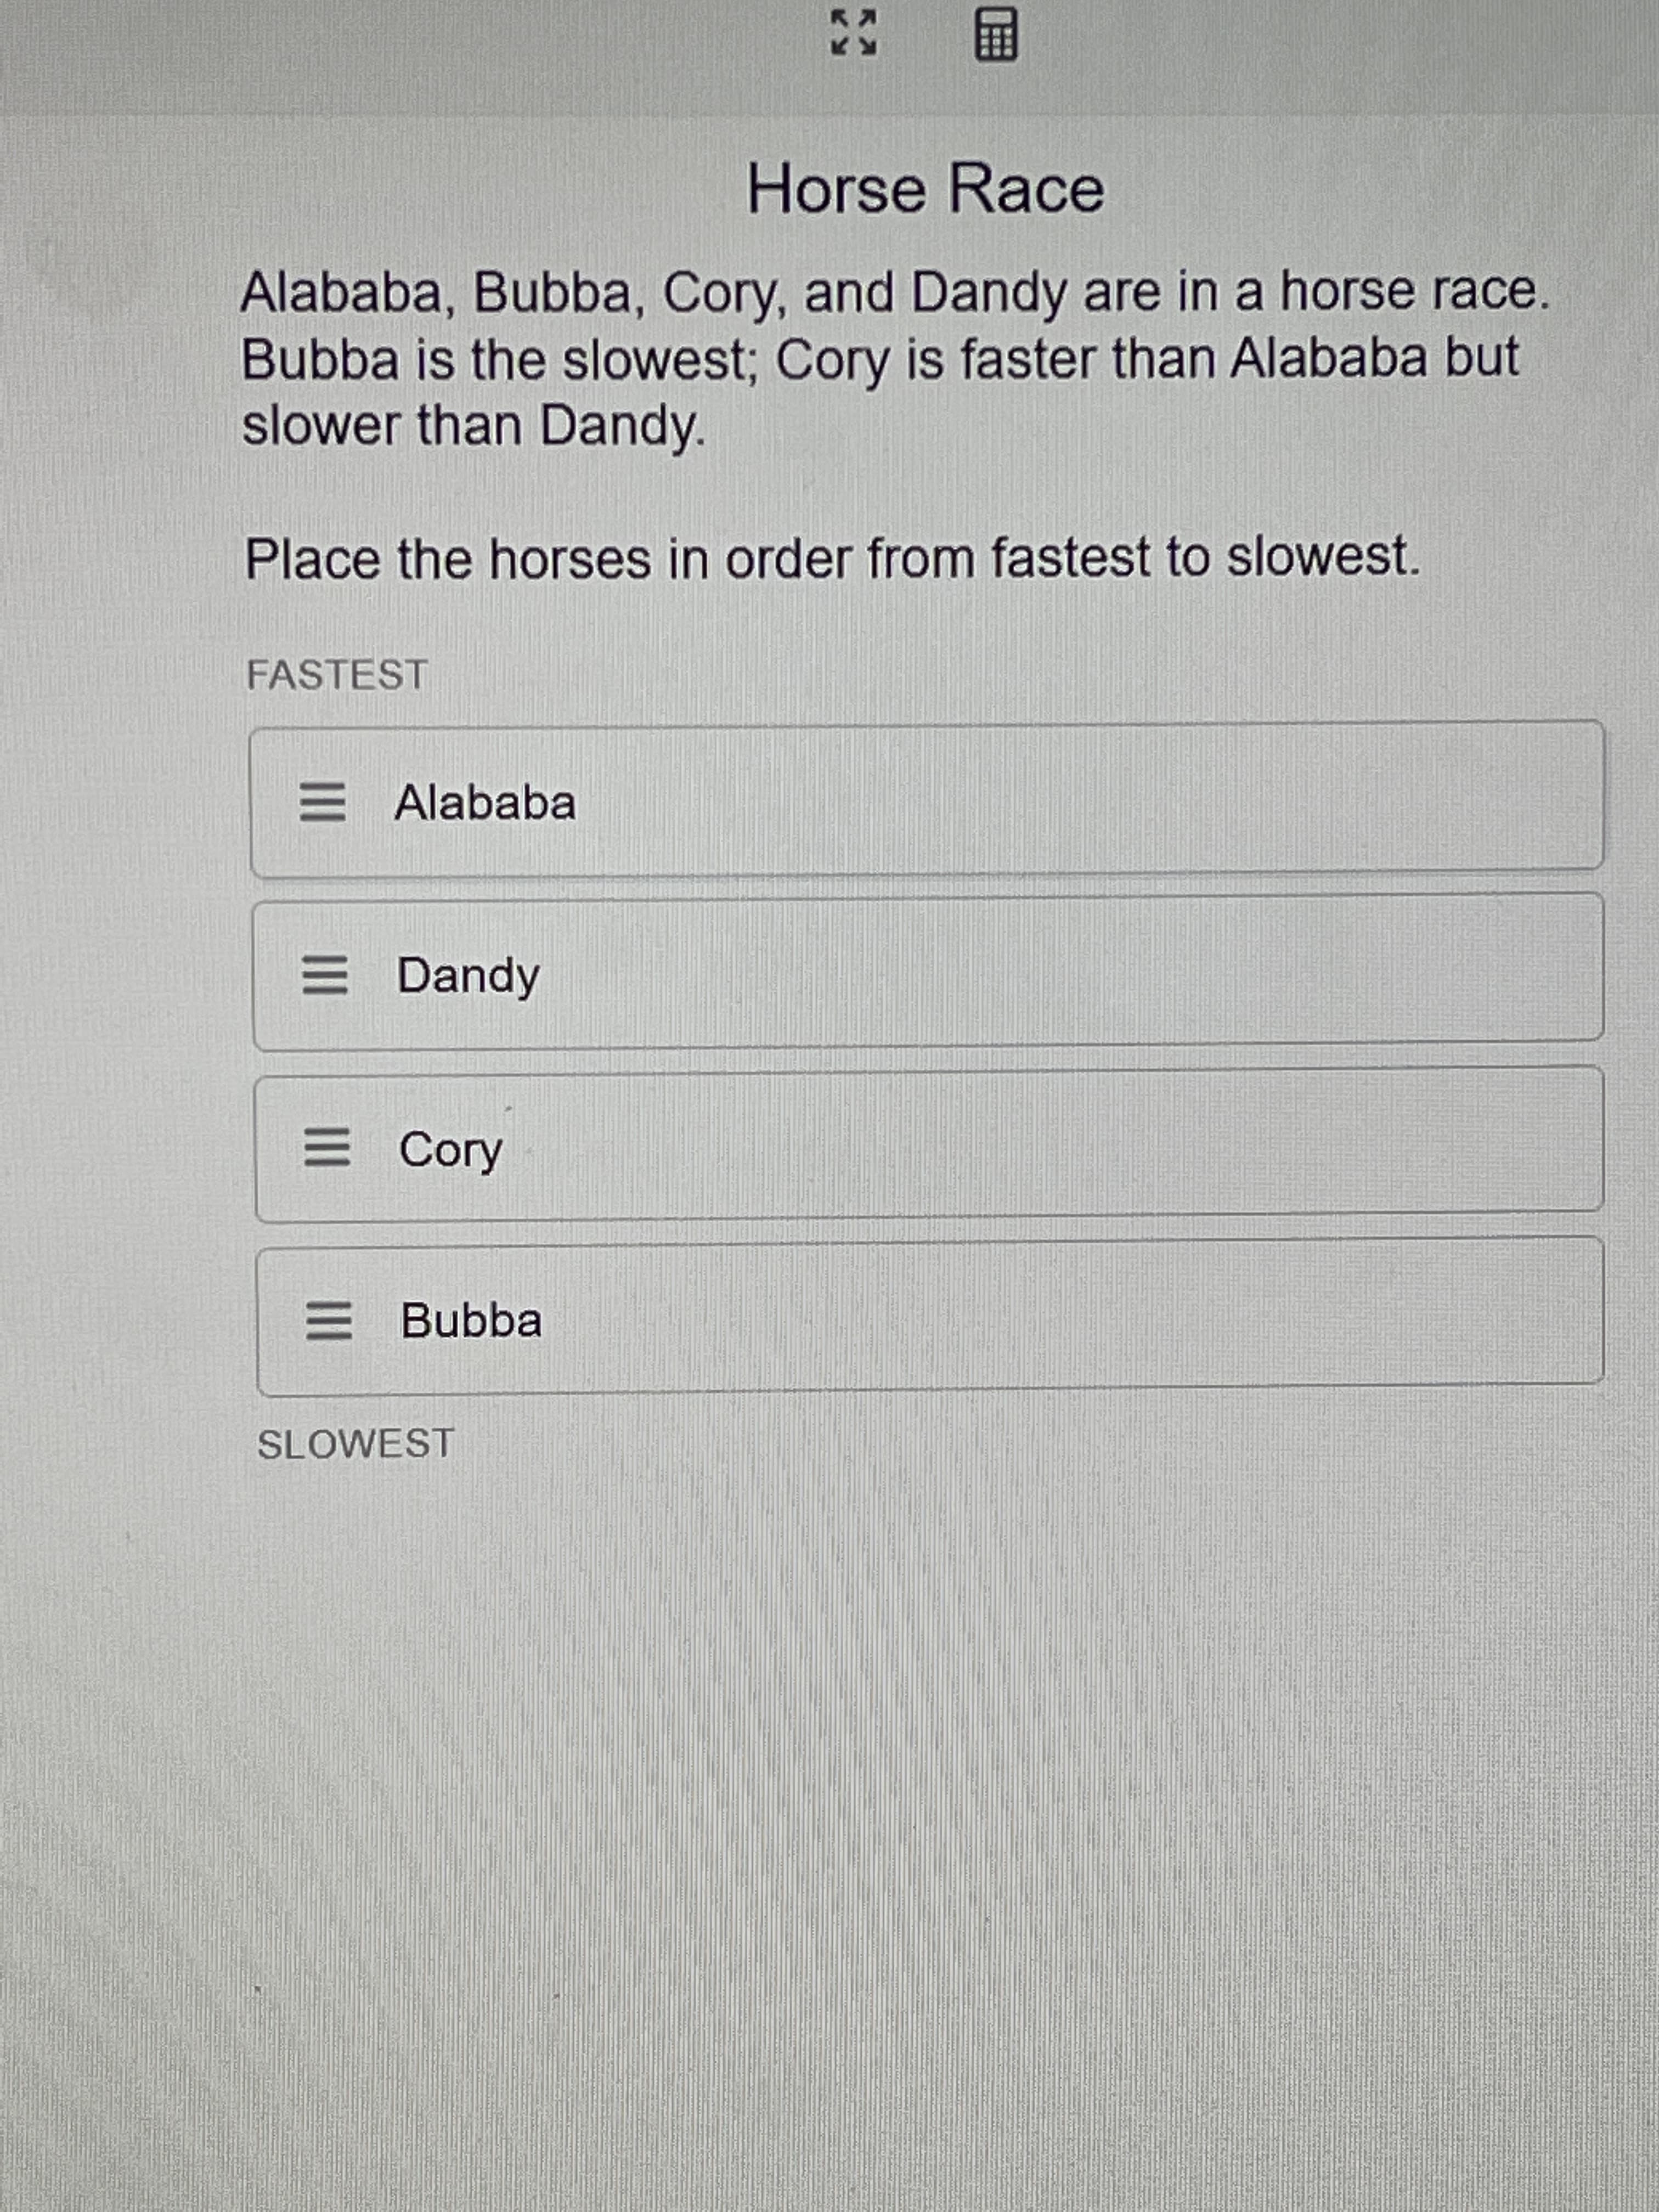 R A
II
II
II
Horse Race
Alababa, Bubba, Cory, and Dandy are in a horse race.
Bubba is the slowest; Cory is faster than Alababa but
slower than Dandy.
Place the horses in order from fastest to slowest.
FASTEST
E Alababa
E Dandy
E Cory
E Bubba
SLOWEST
